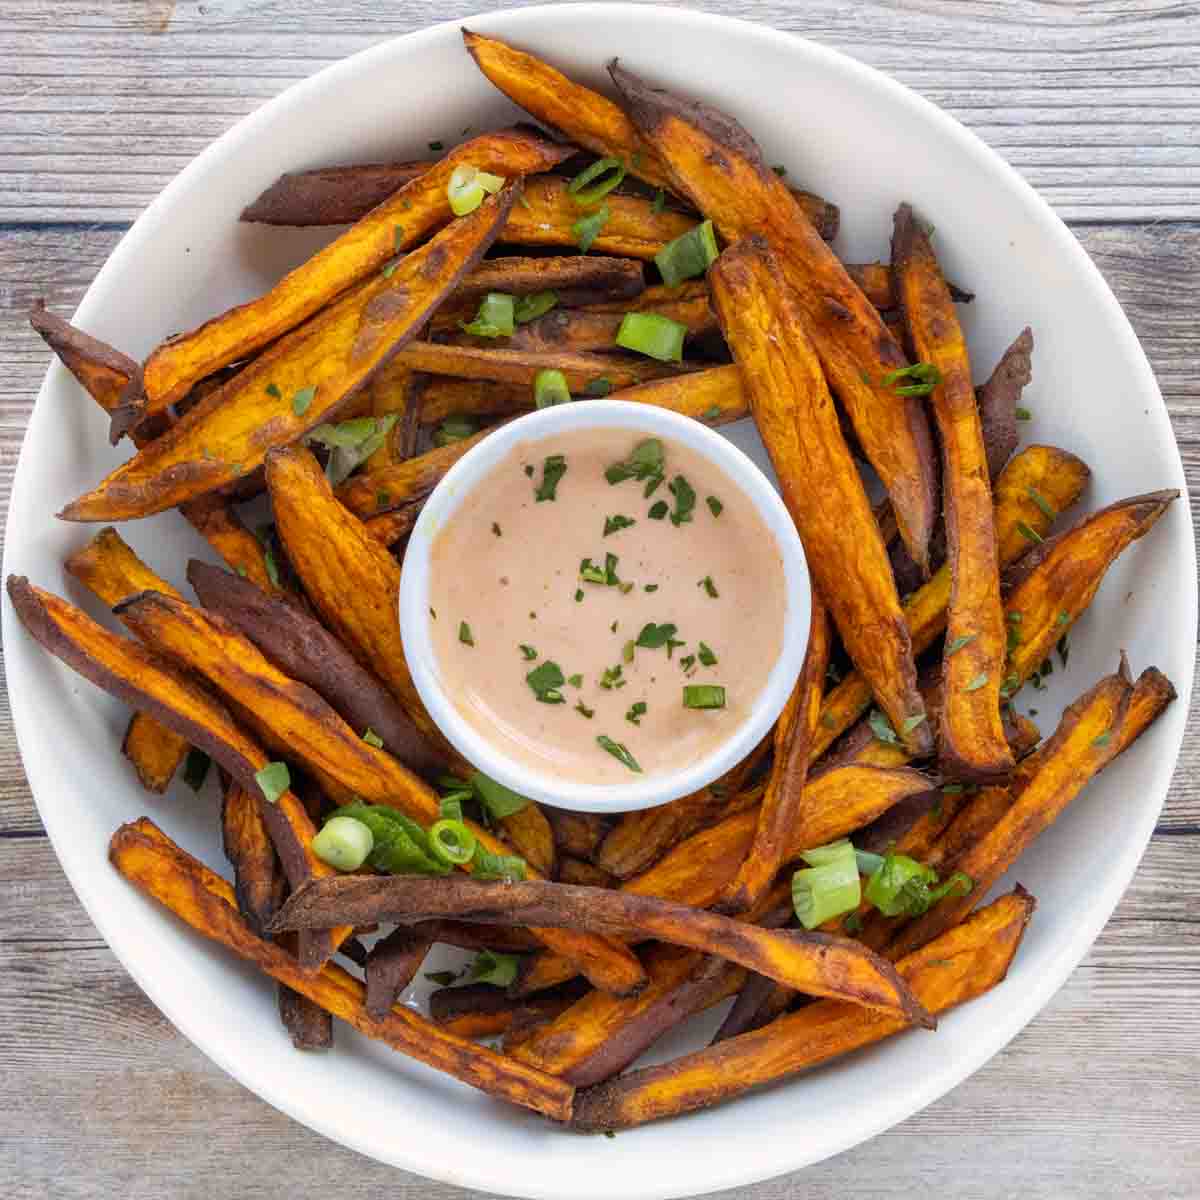 Air fryer sweet potato fries with sriracha mayo in a white bowl.